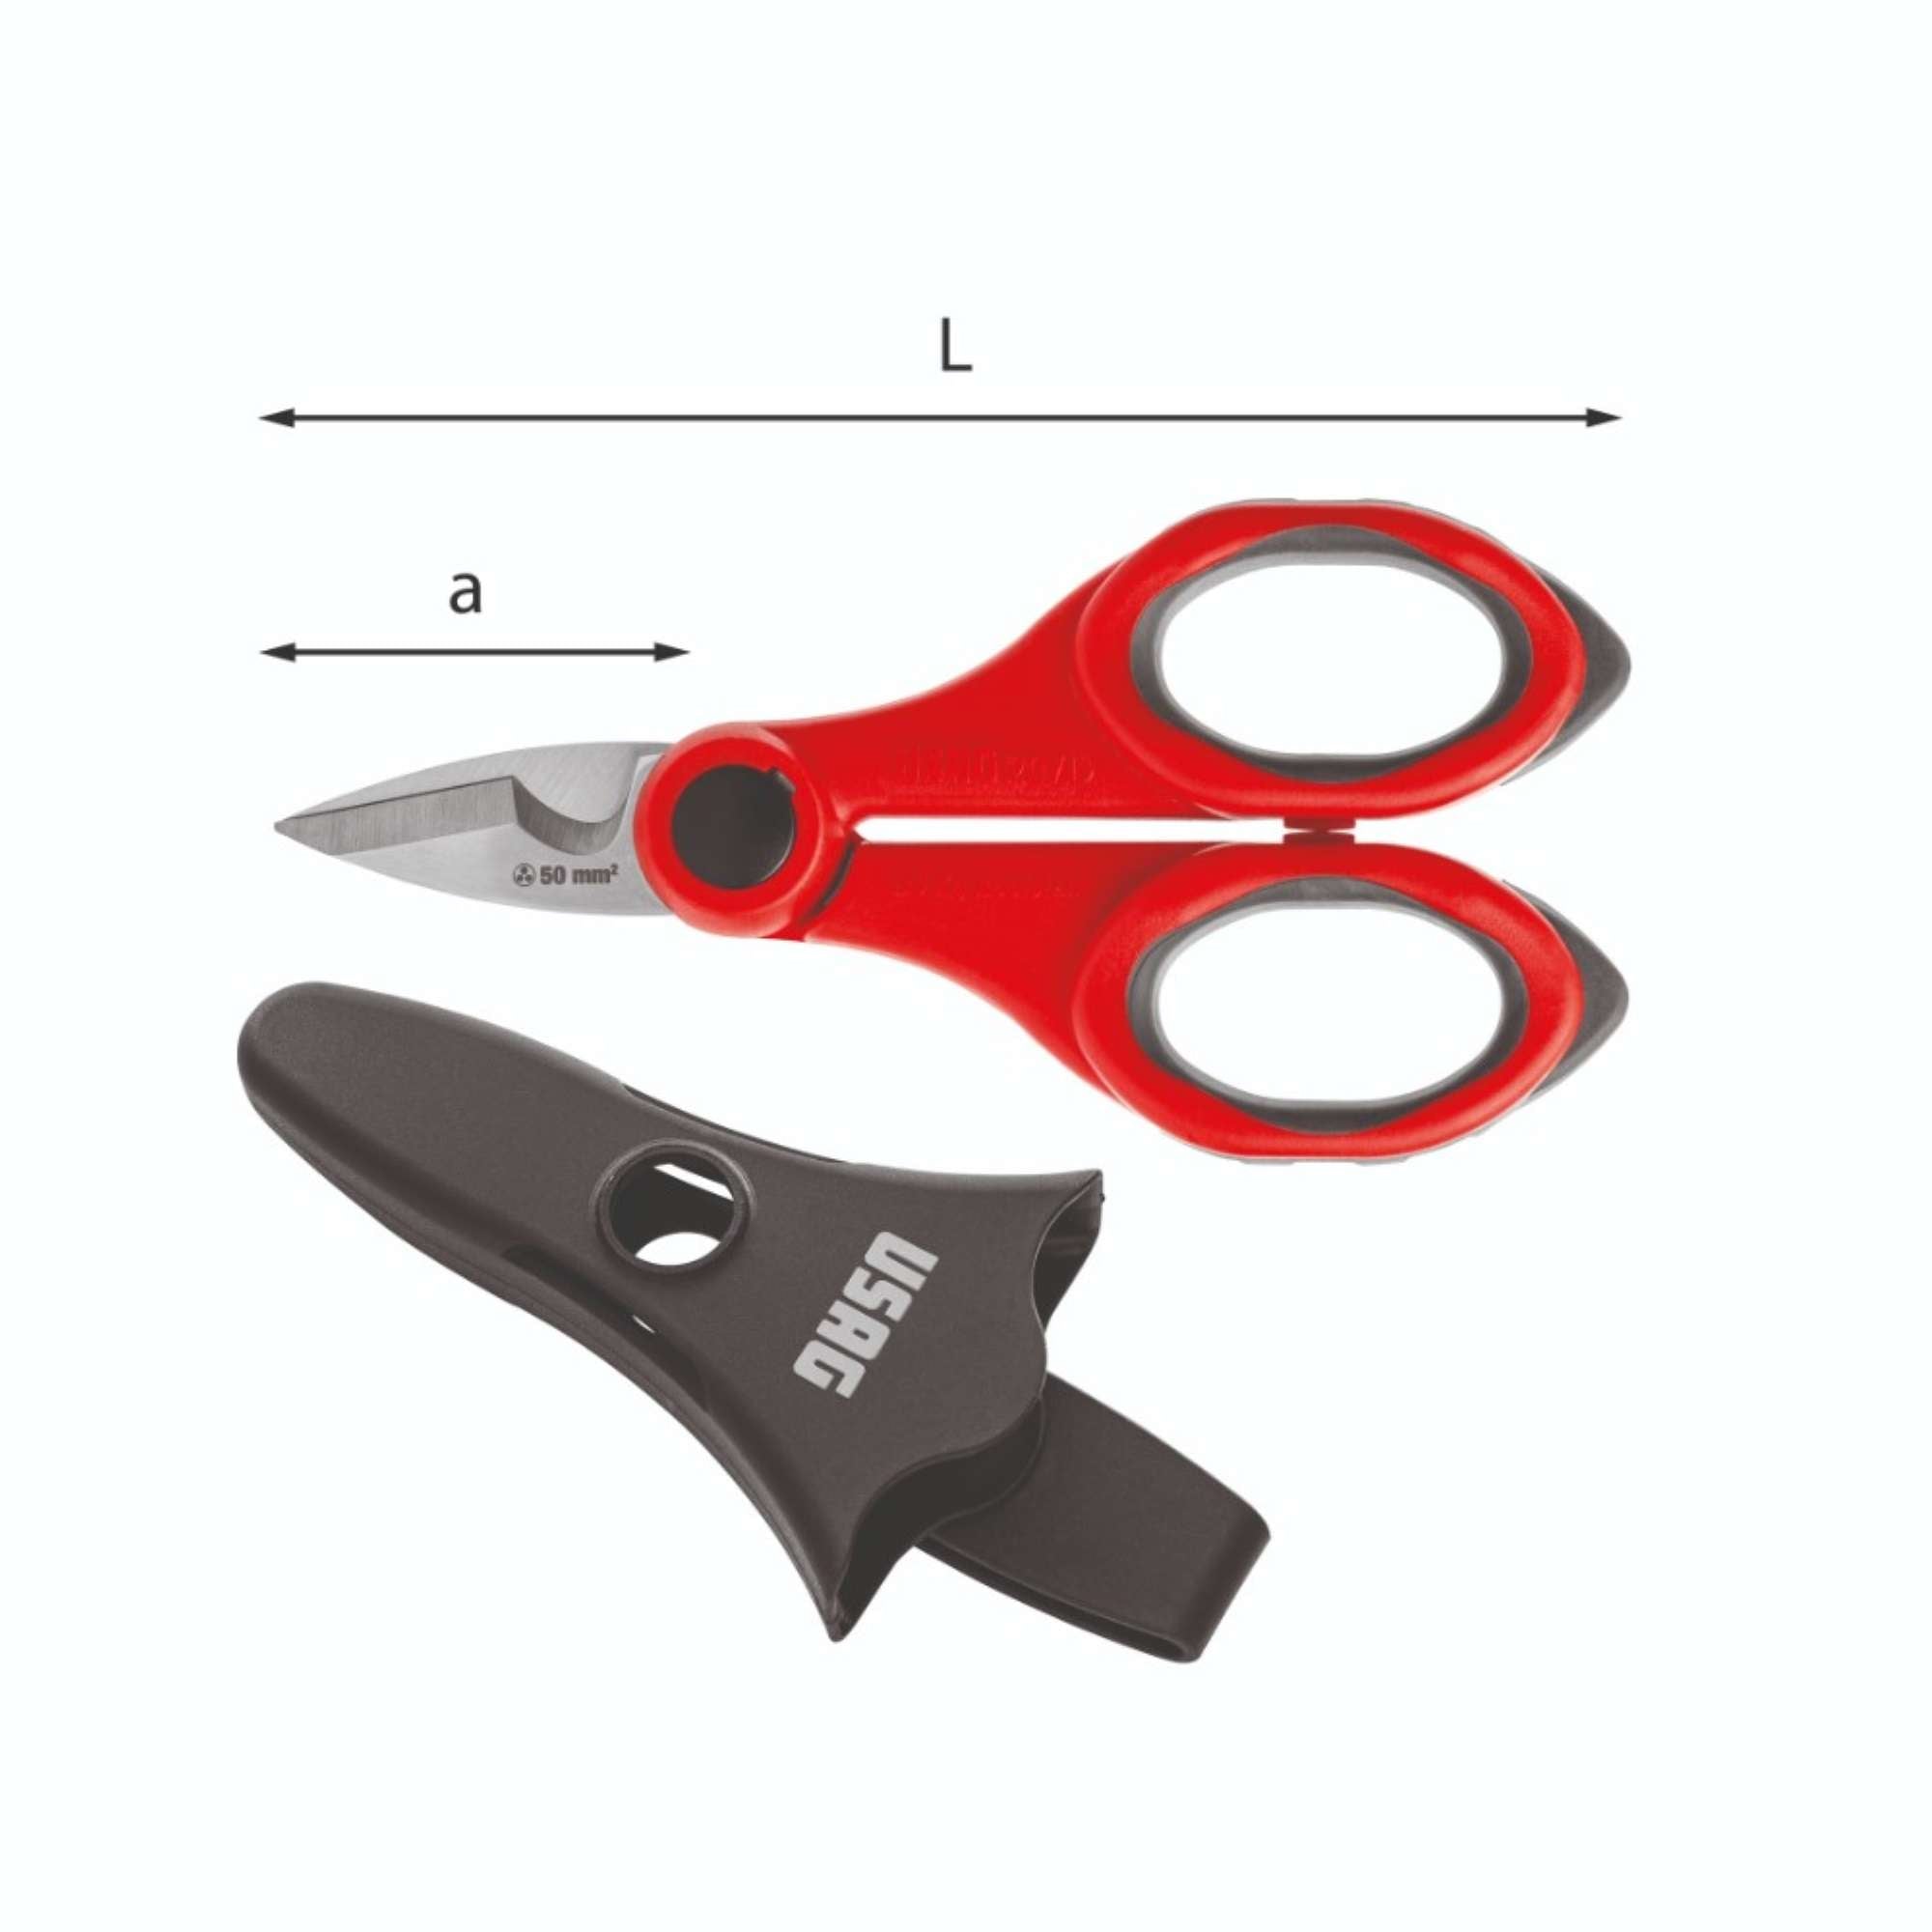 Electrician's scissors, stainless steel blades - Usag 207 D U02070008